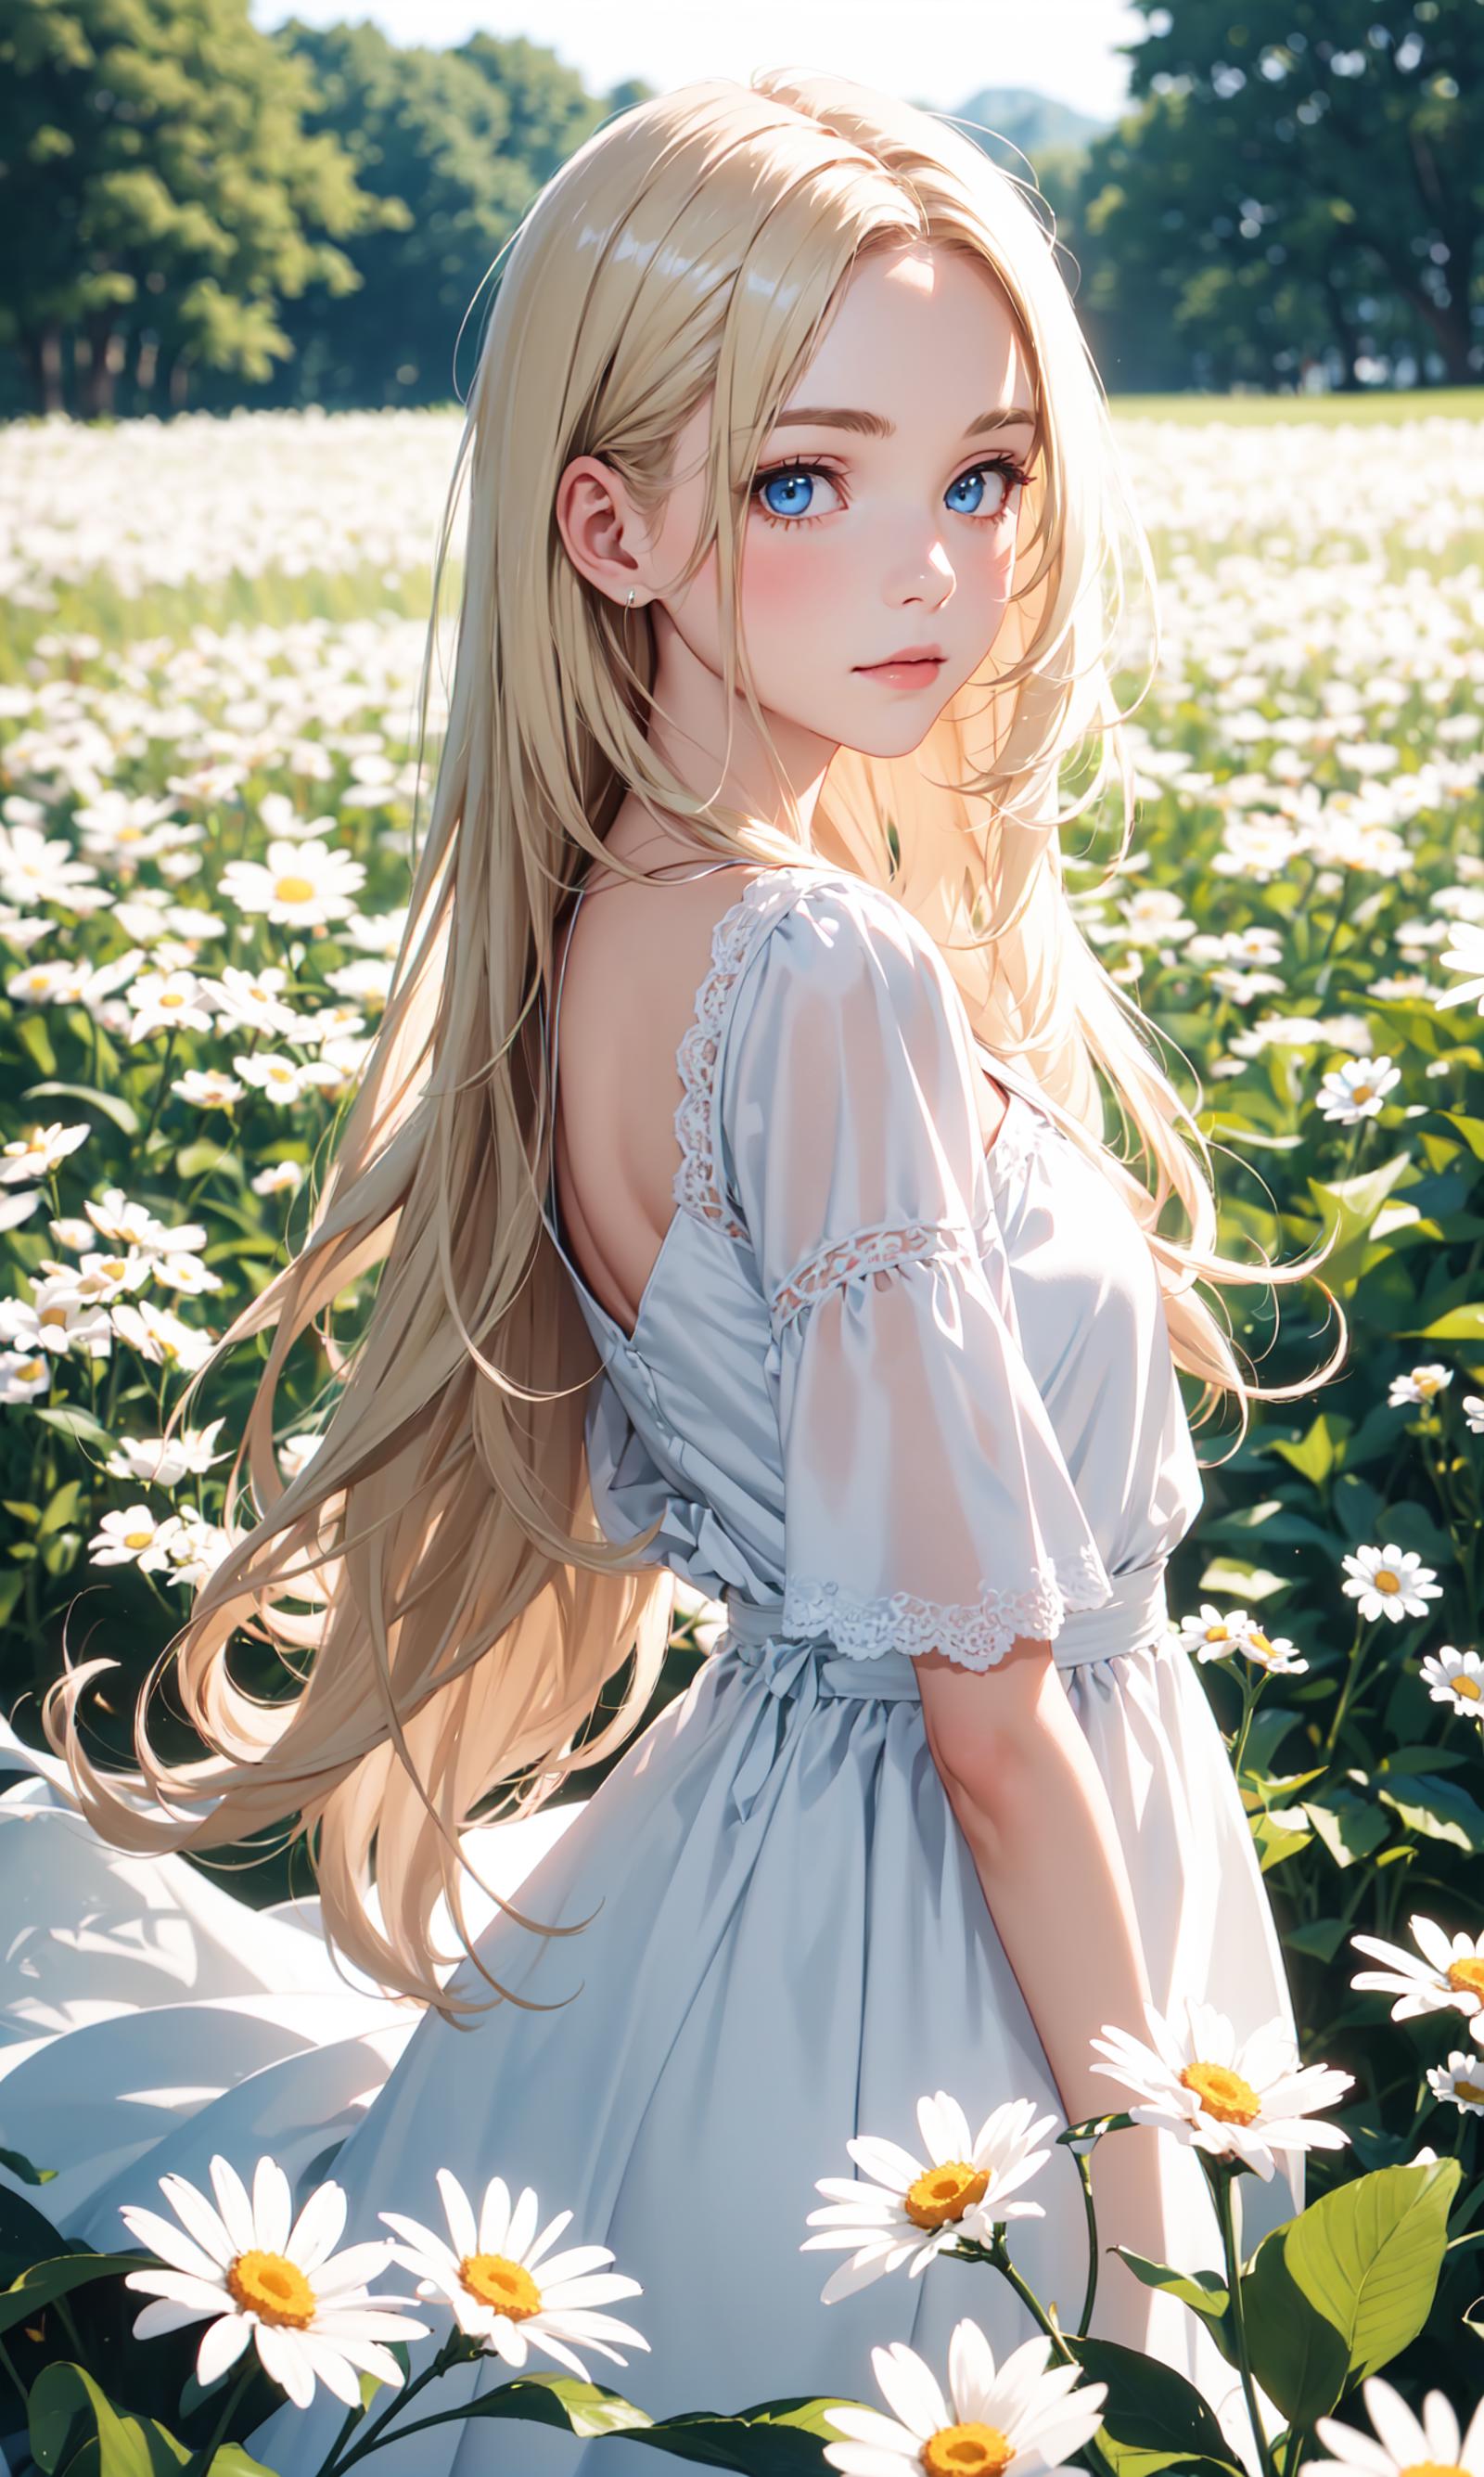 A beautiful woman with blue eyes and blonde hair wearing a white dress.